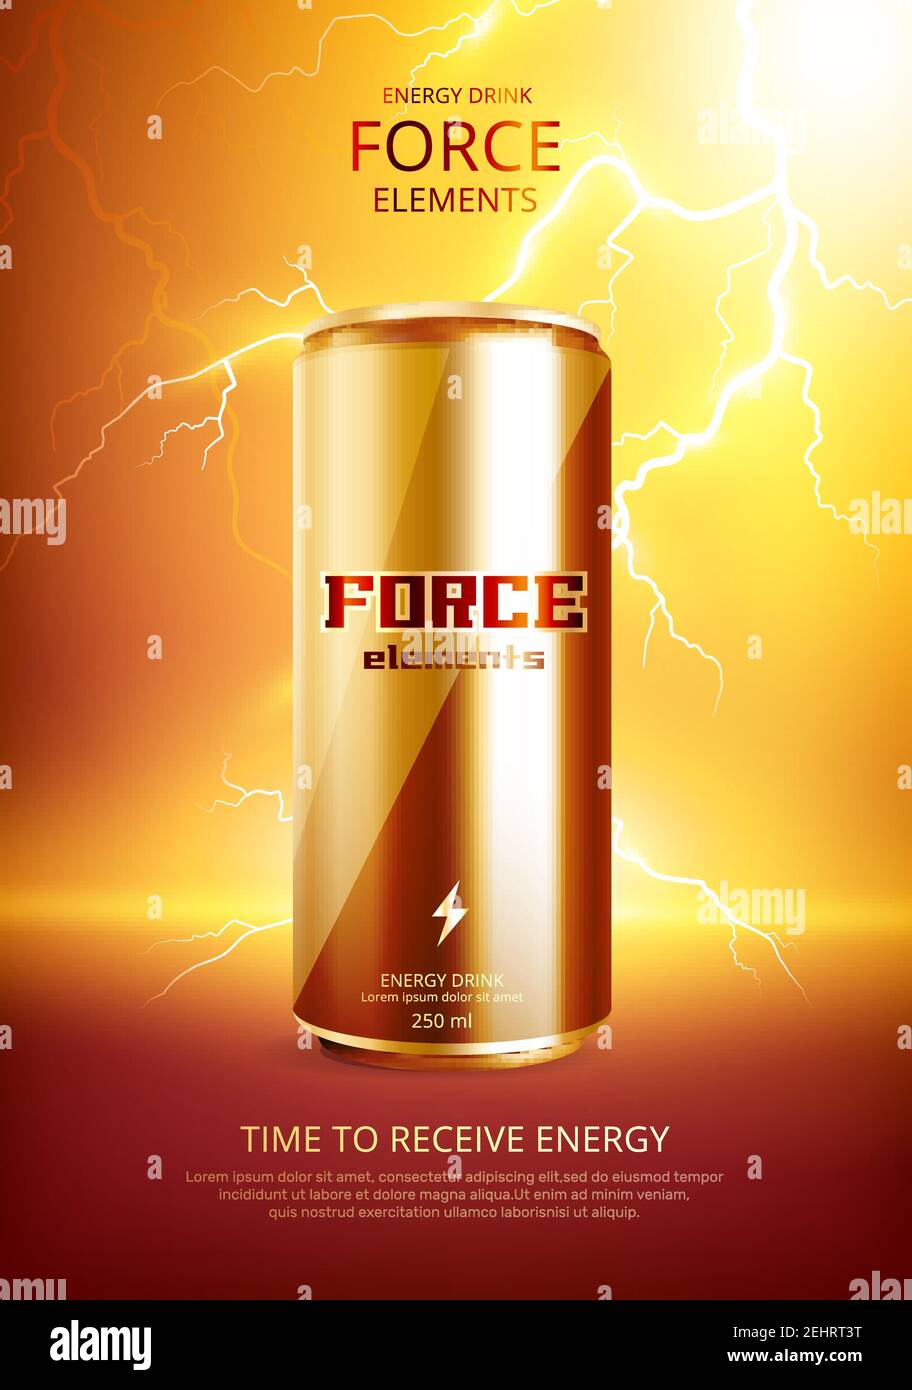 Realistic energy drink metal can poster with energy drink force elements  time to receive energy descriptions vector illustration Stock Vector Image  & Art - Alamy